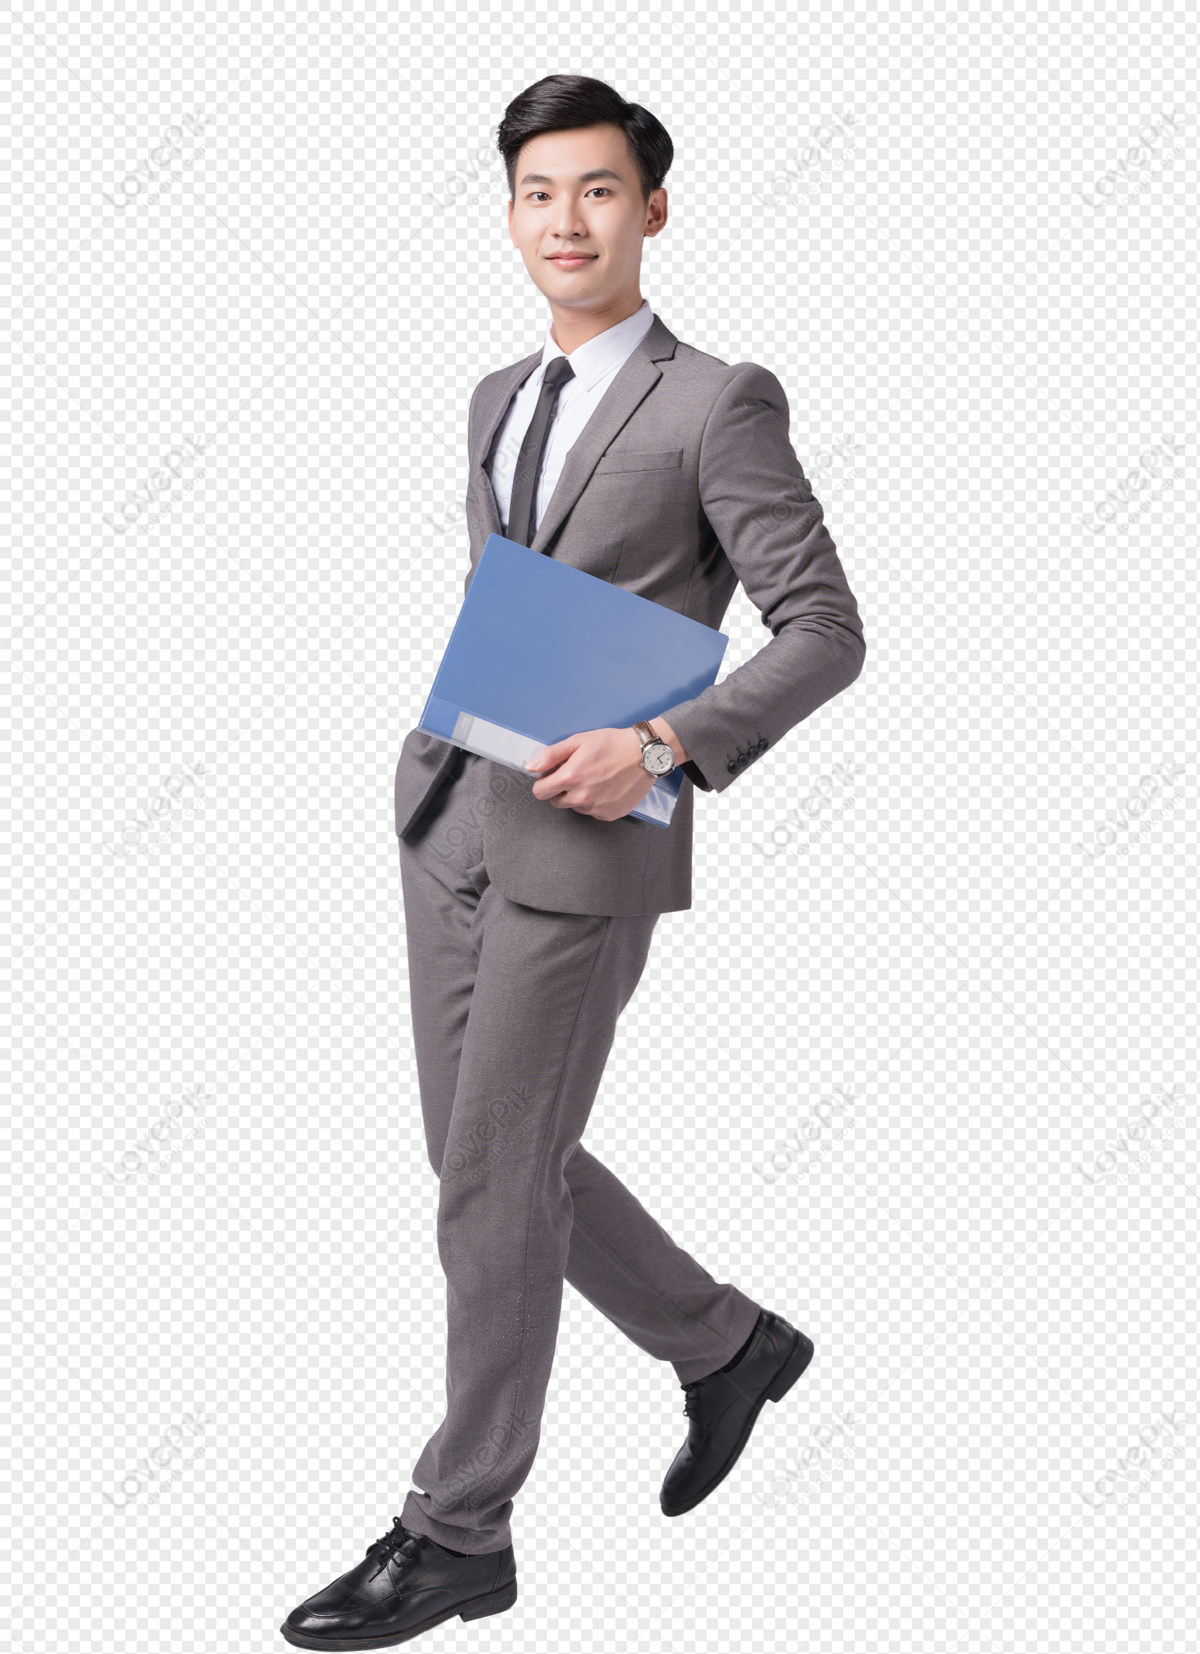 A Picture Of A Business Man With A File. PNG Hd Transparent Image And ...